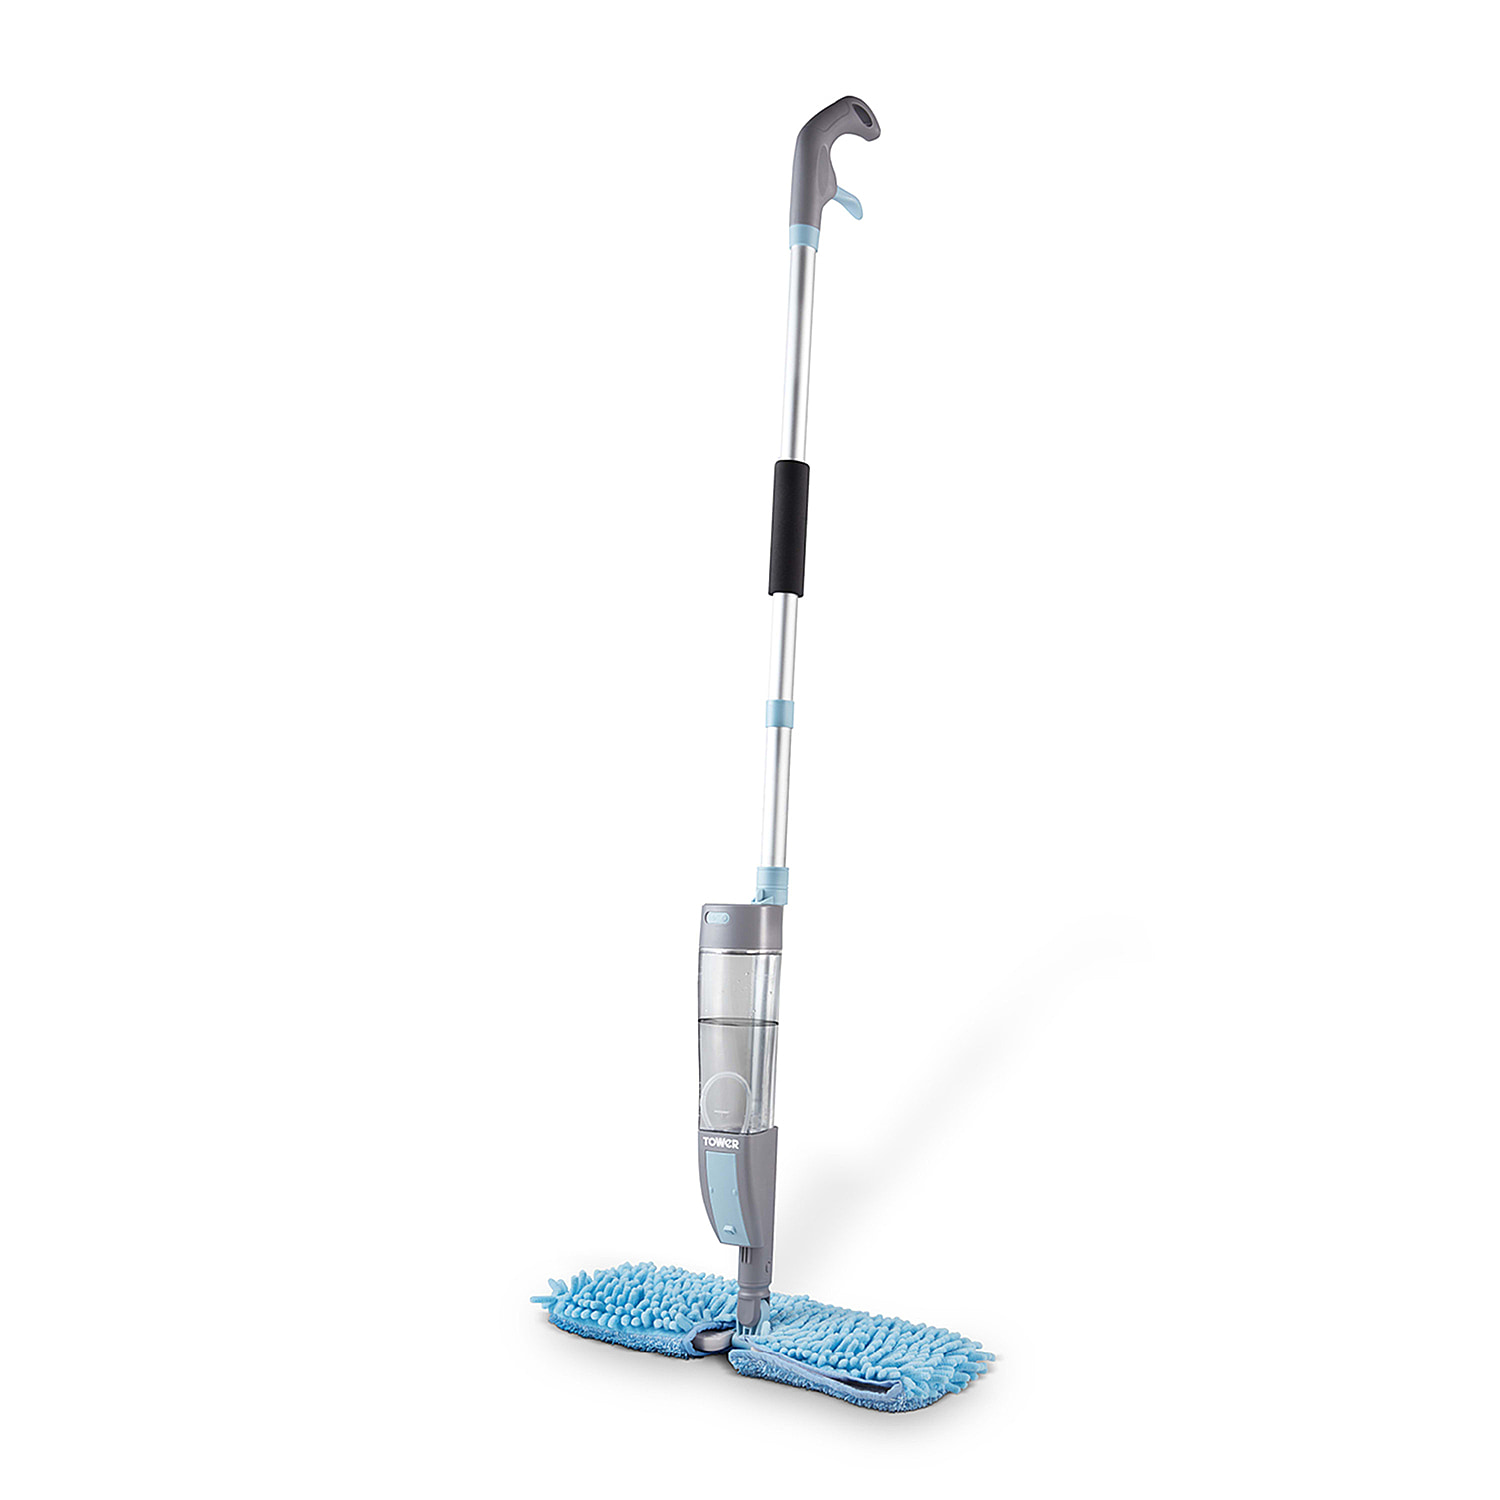 Tower: Anti Bac Spray Mop with Electrolysis Function